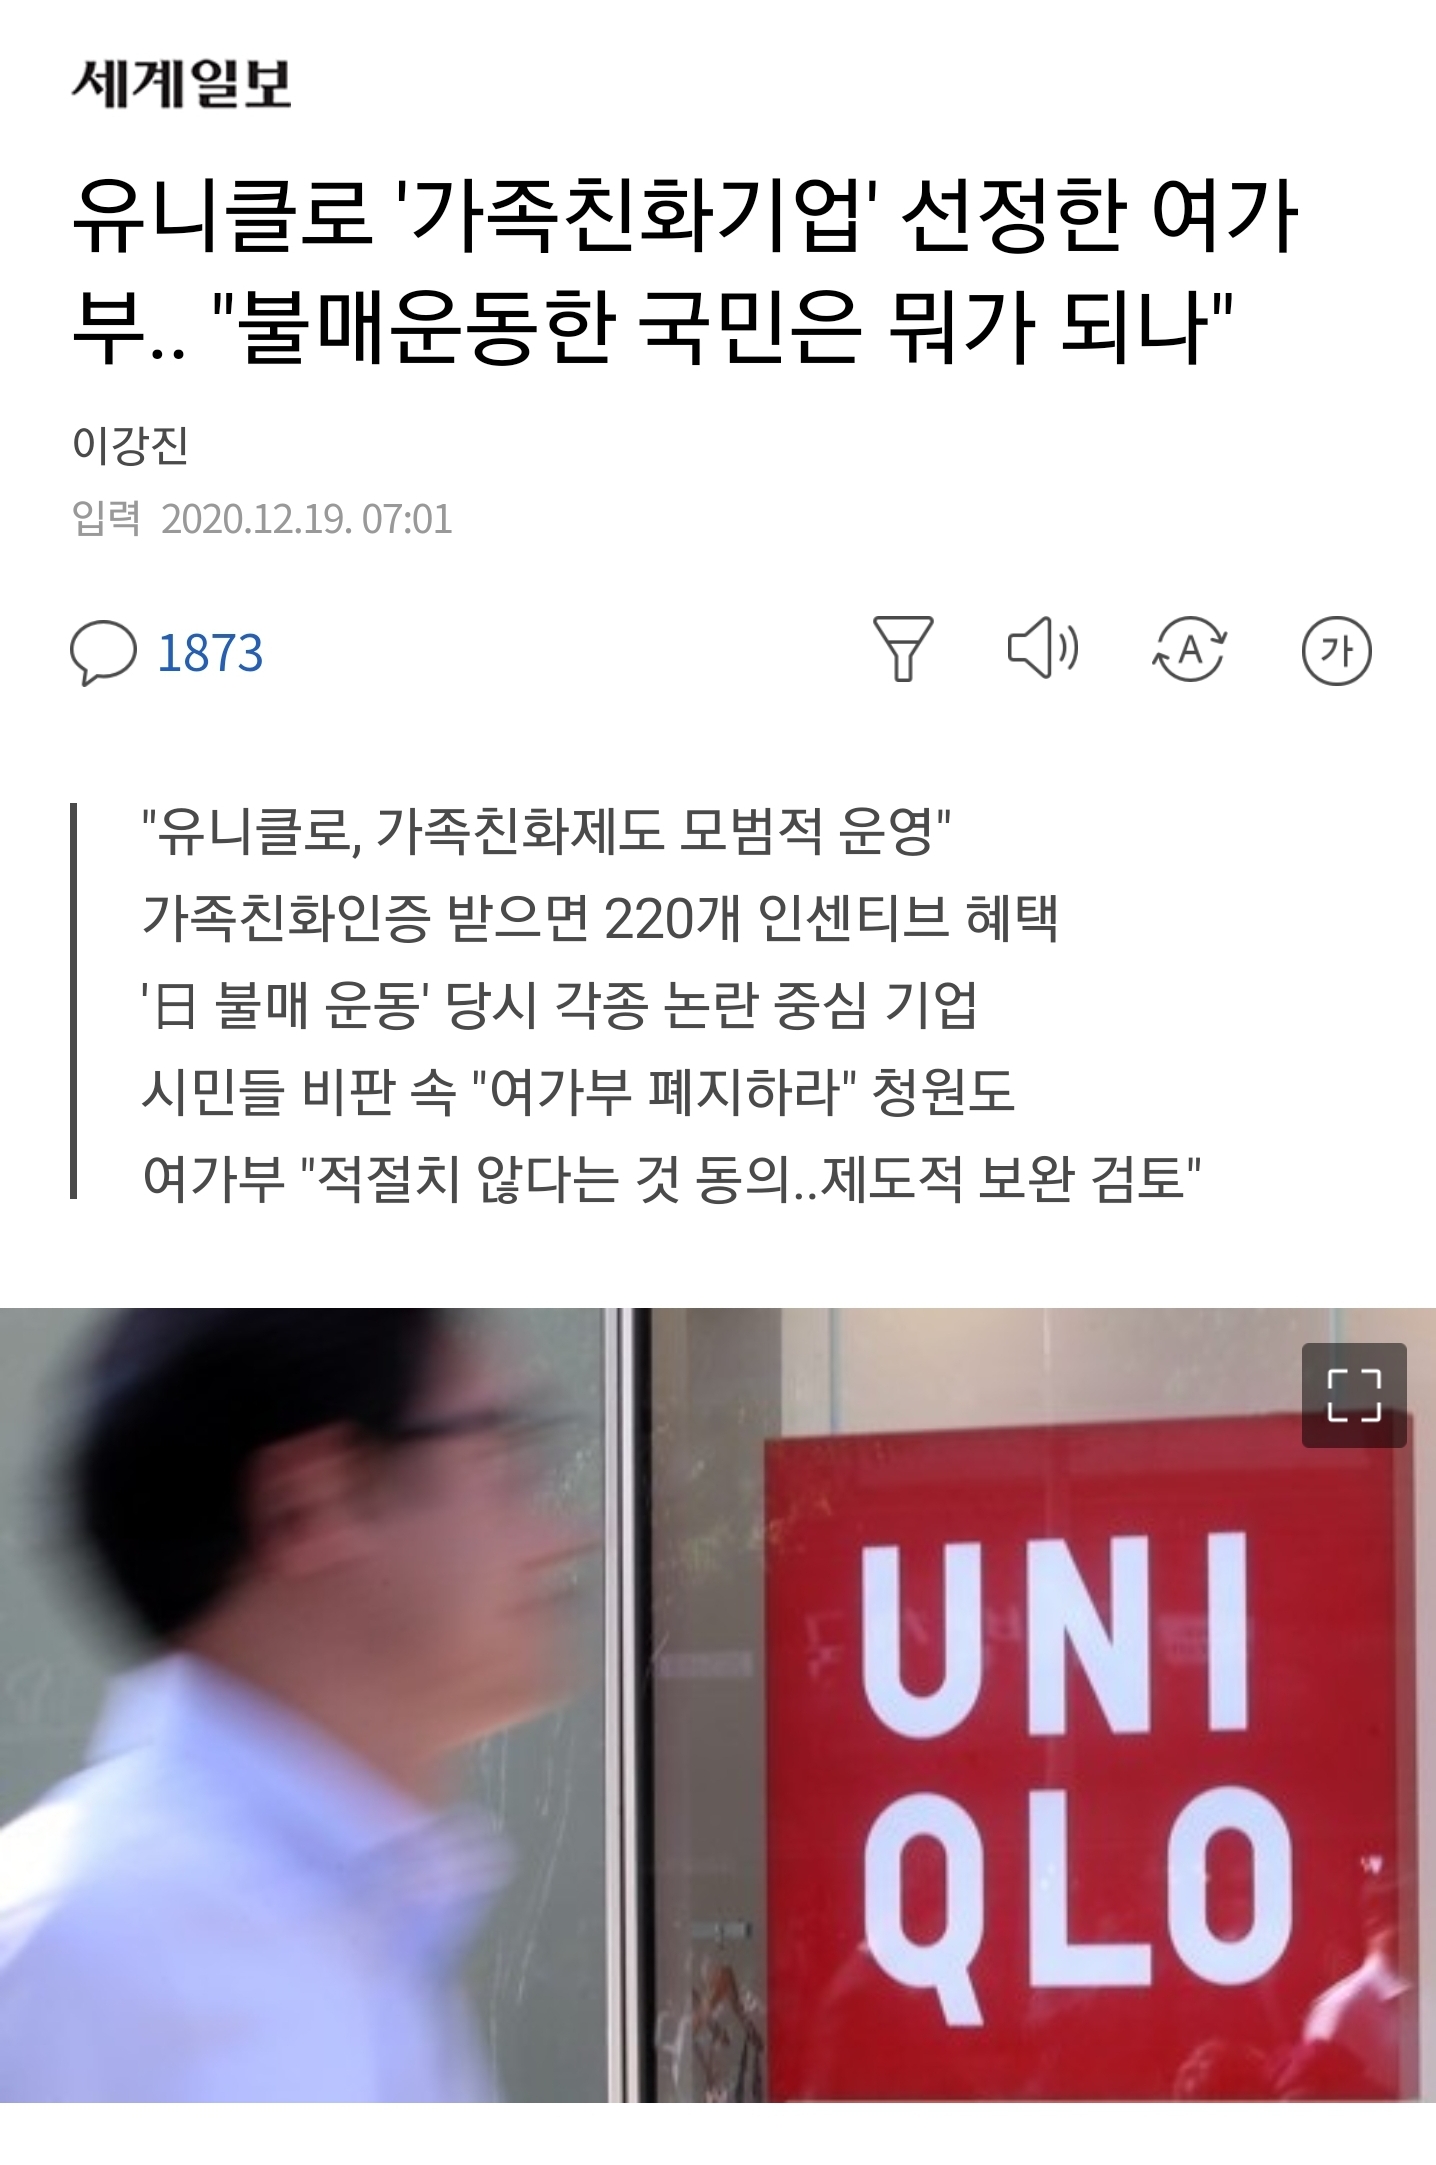 Uniqlo controversy- What are the boycotts doing?